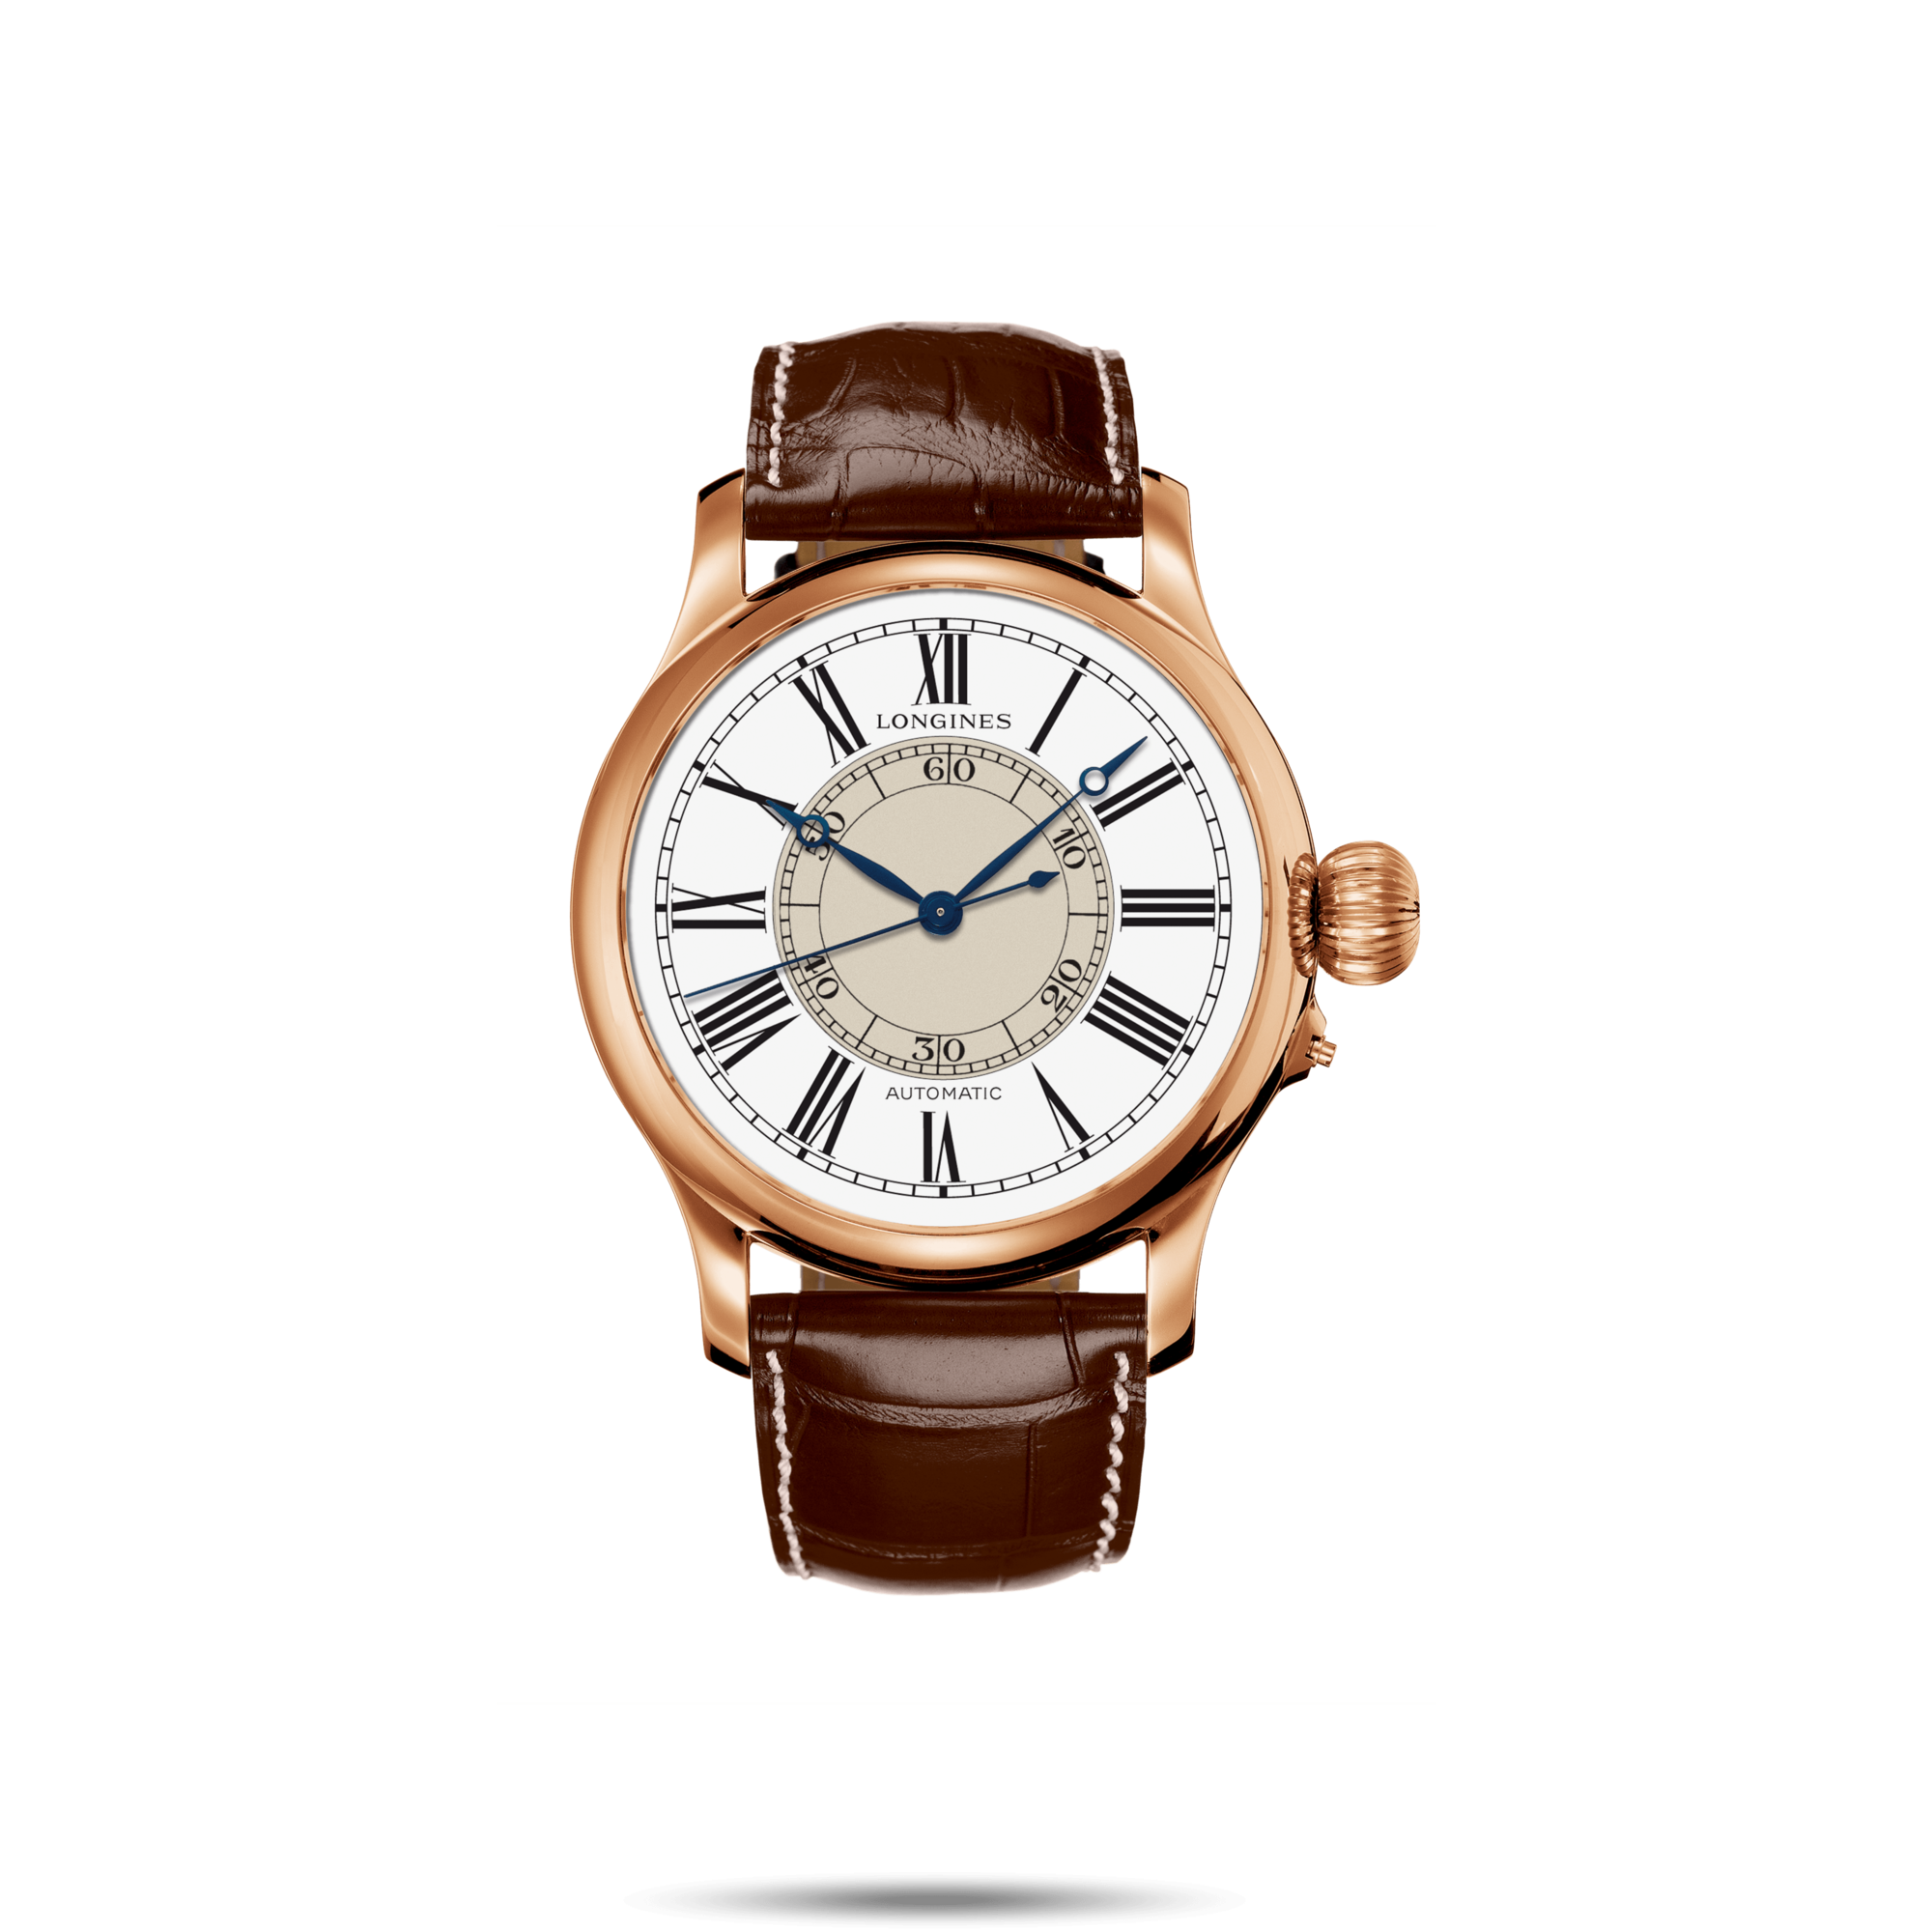 The Longines Weems Second-Setting Watch